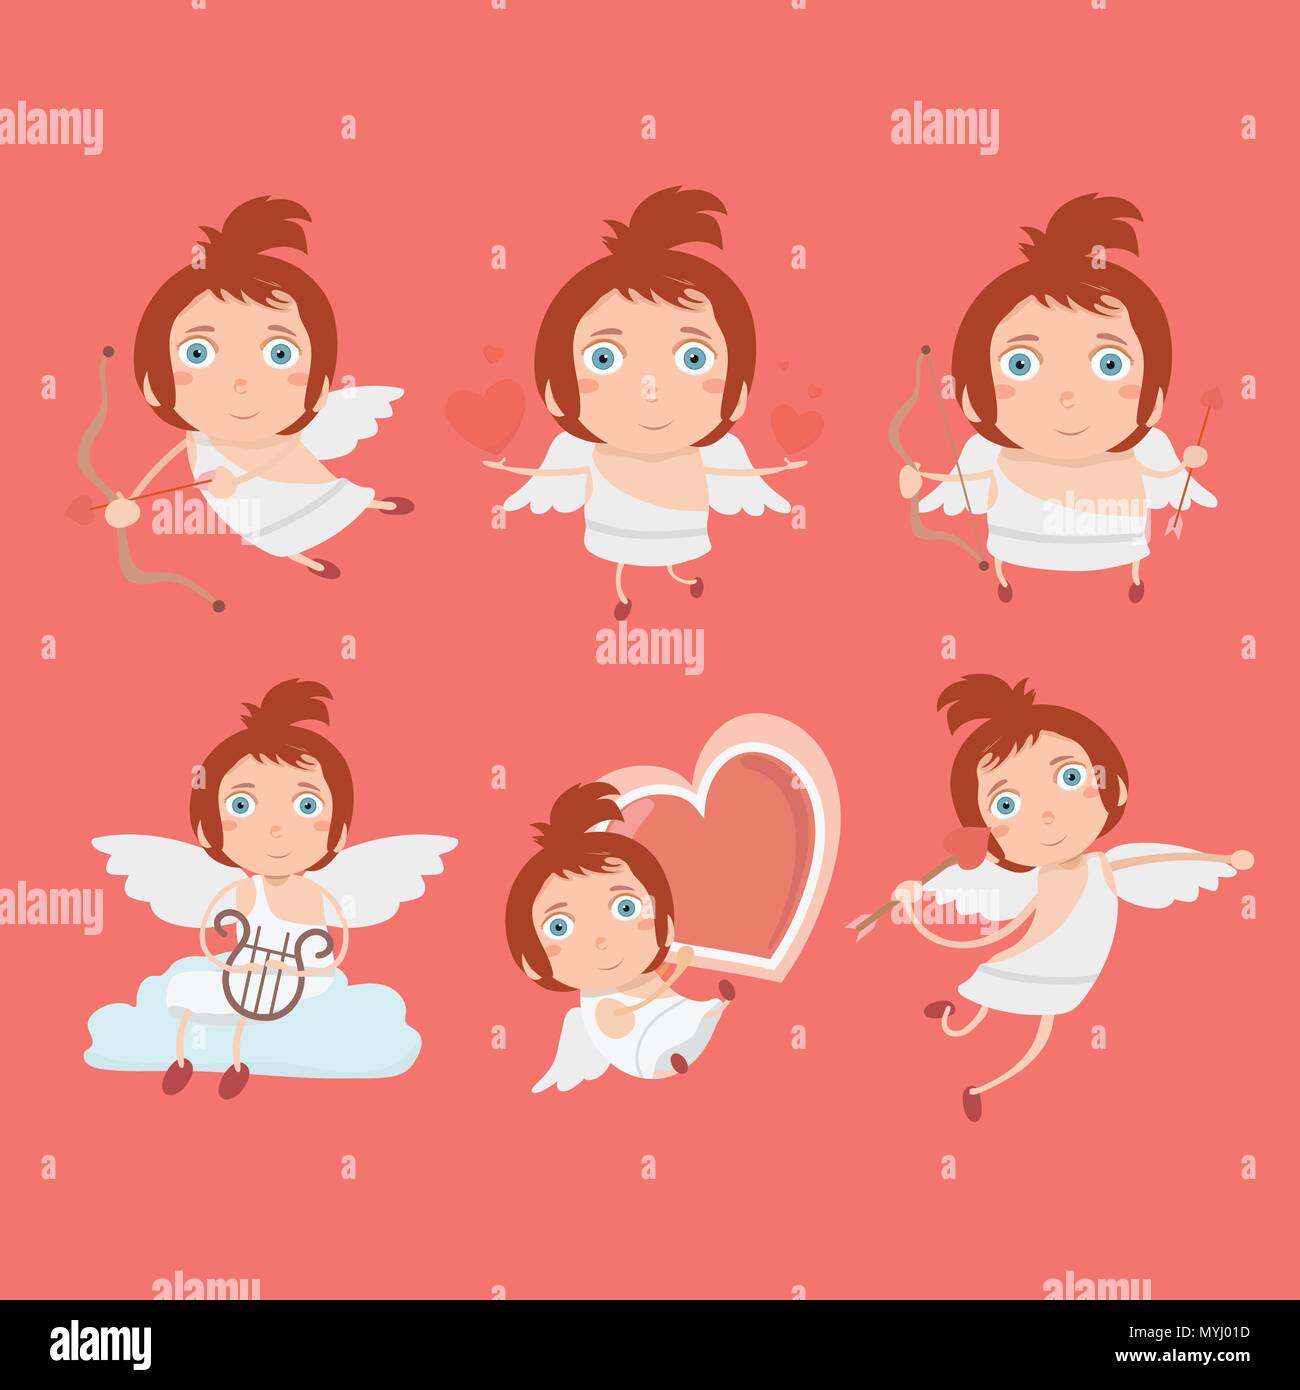 Cupid angels icons set - little boy with a bow and arrows. Stock Vector